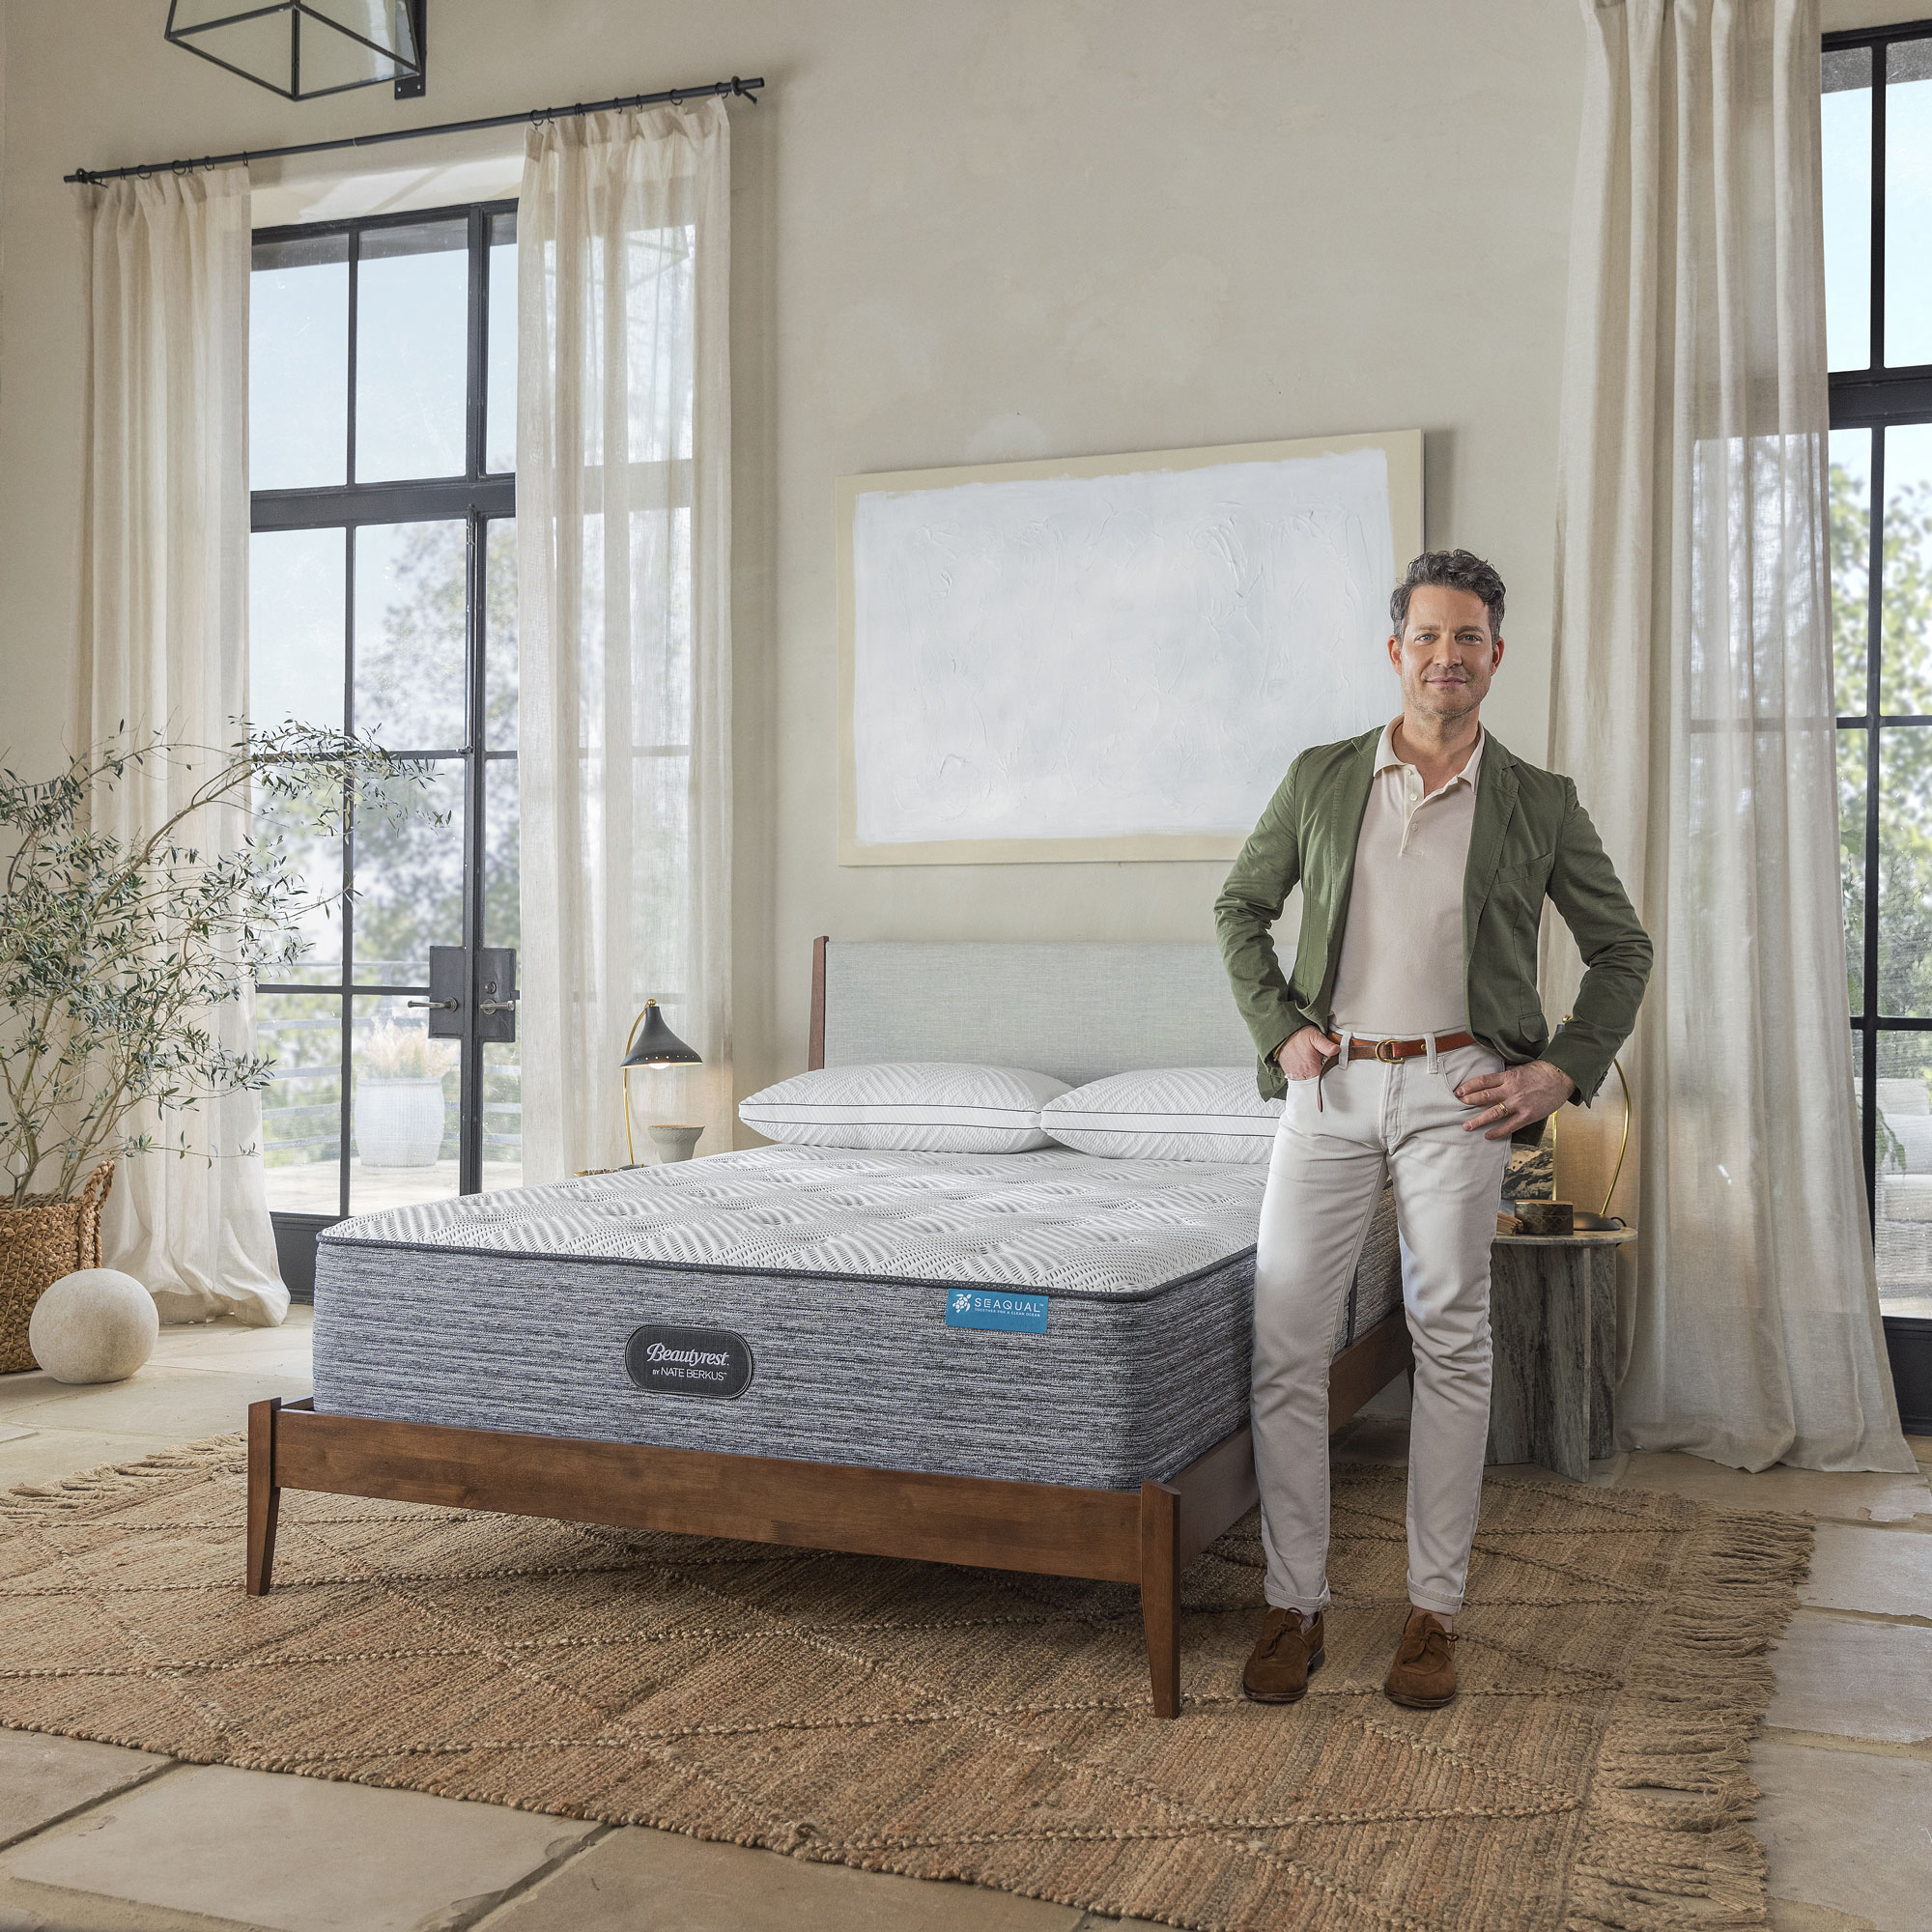 nate berkus with beautyrest bedding collection with mattress and pillows in neutral bedroom